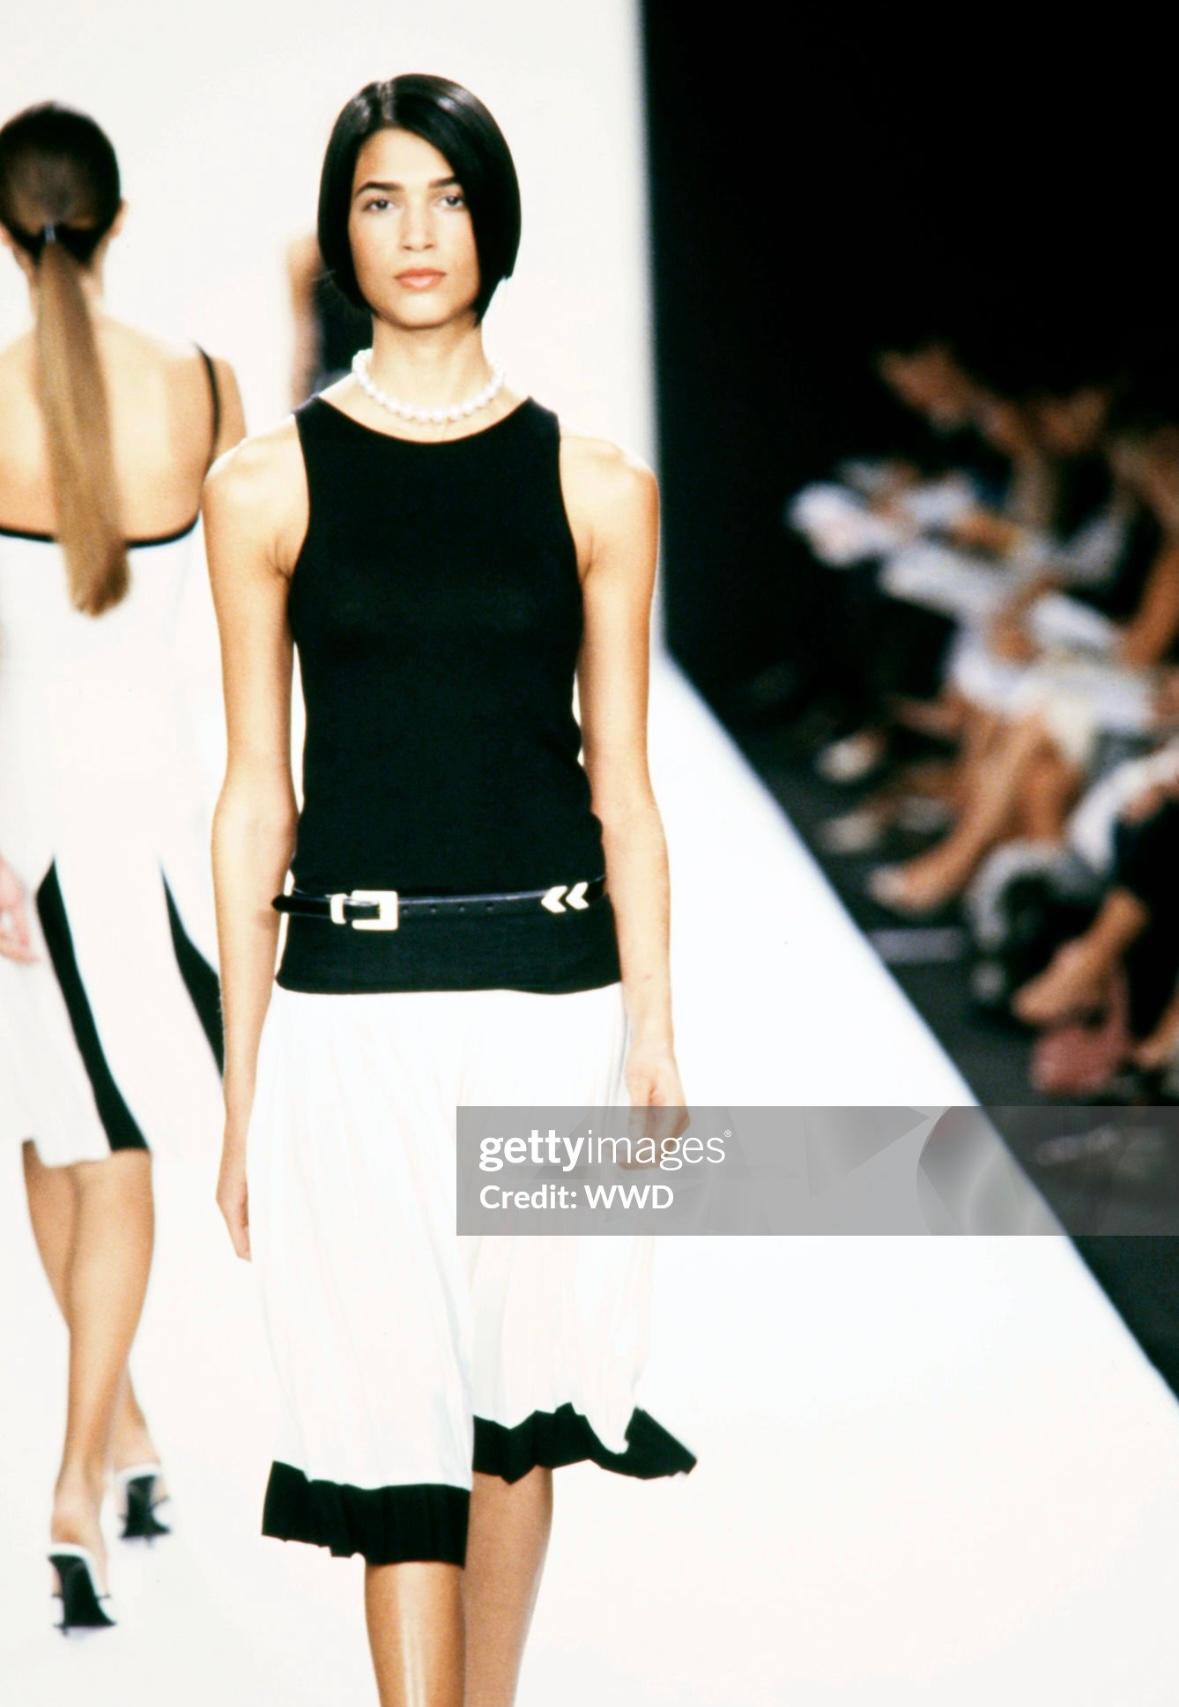 From the Spring/Summer 2001 collection, this fabulous black and off-white pleated Ralph Lauren Purple Label skirt debuted on the season's runway as part of look 17, modeled by Teresa Lourenco. This chic tennis-style skirt features pleats throughout